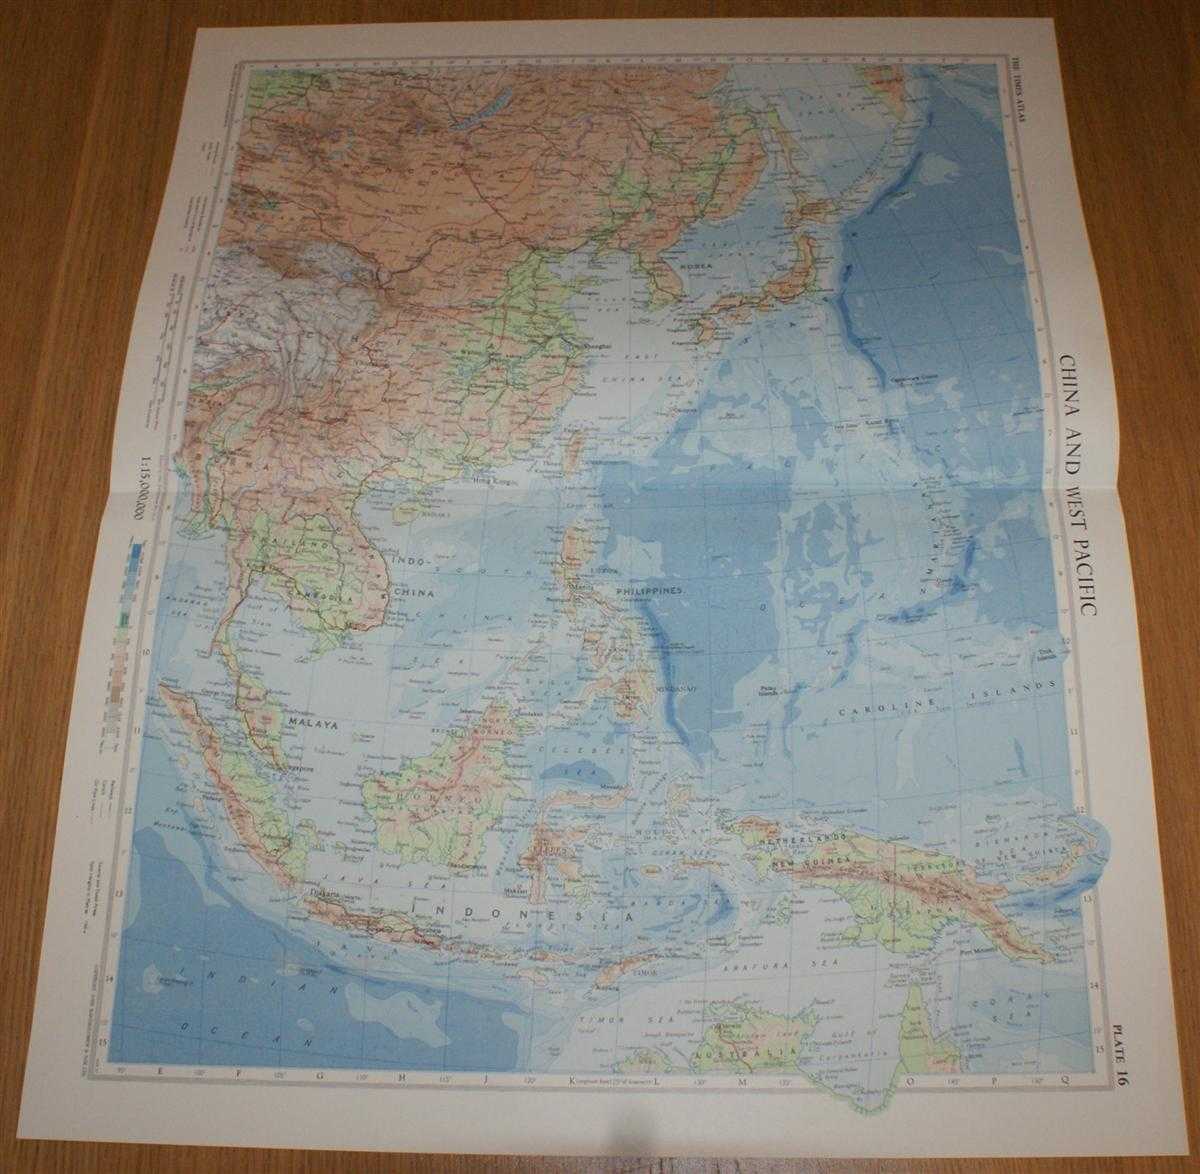 John Bartholomew - Map of 'China and West Pacific' - Plate 16 disbound from 1958 Mid-Century Times Atlas of the World, including Korea, Japan, Philippines, Indonesia and Indo-China